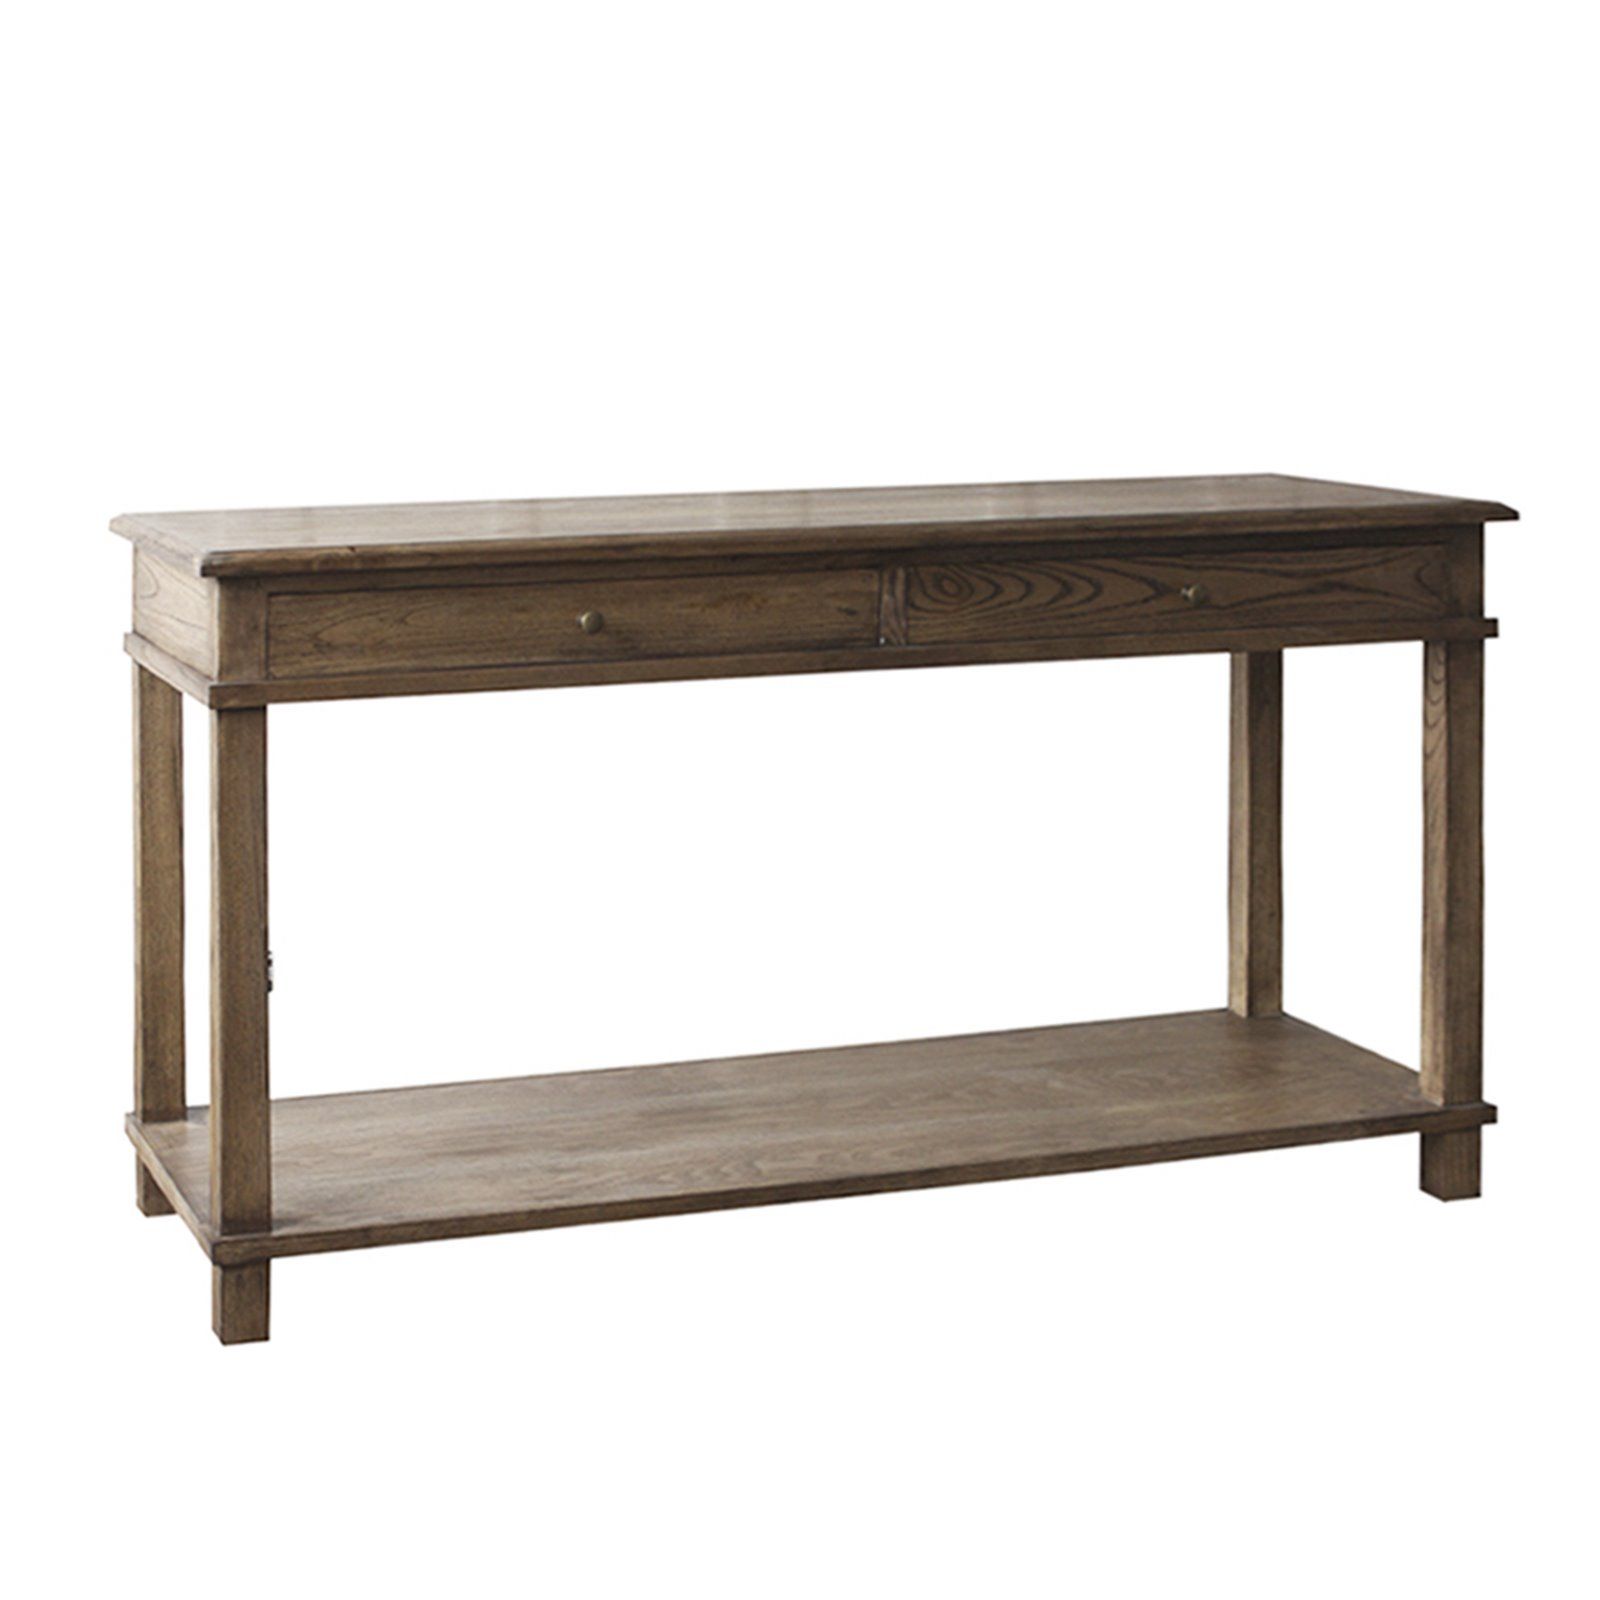 Classic Reclaimed Wood Console Table Within Smoked Barnwood Console Tables (View 4 of 20)